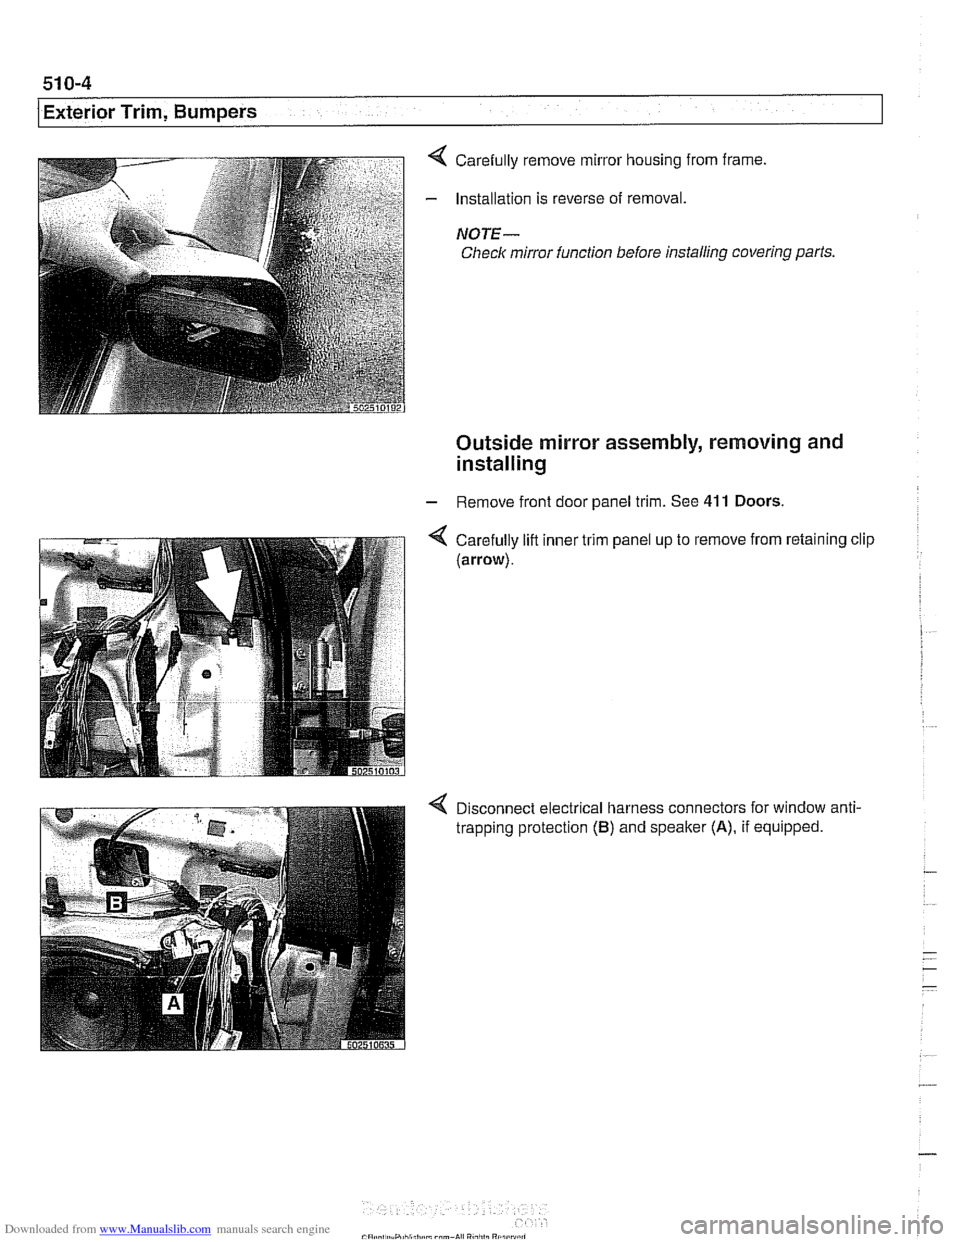 BMW 530i 1997 E39 Workshop Manual Downloaded from www.Manualslib.com manuals search engine 
51 0-4 
I Exterior Trim. Bumpers 
4 Carefully remove mirror housing from frame 
- Installation  is reverse  of removal. 
NOTE- 
Check  mirror 